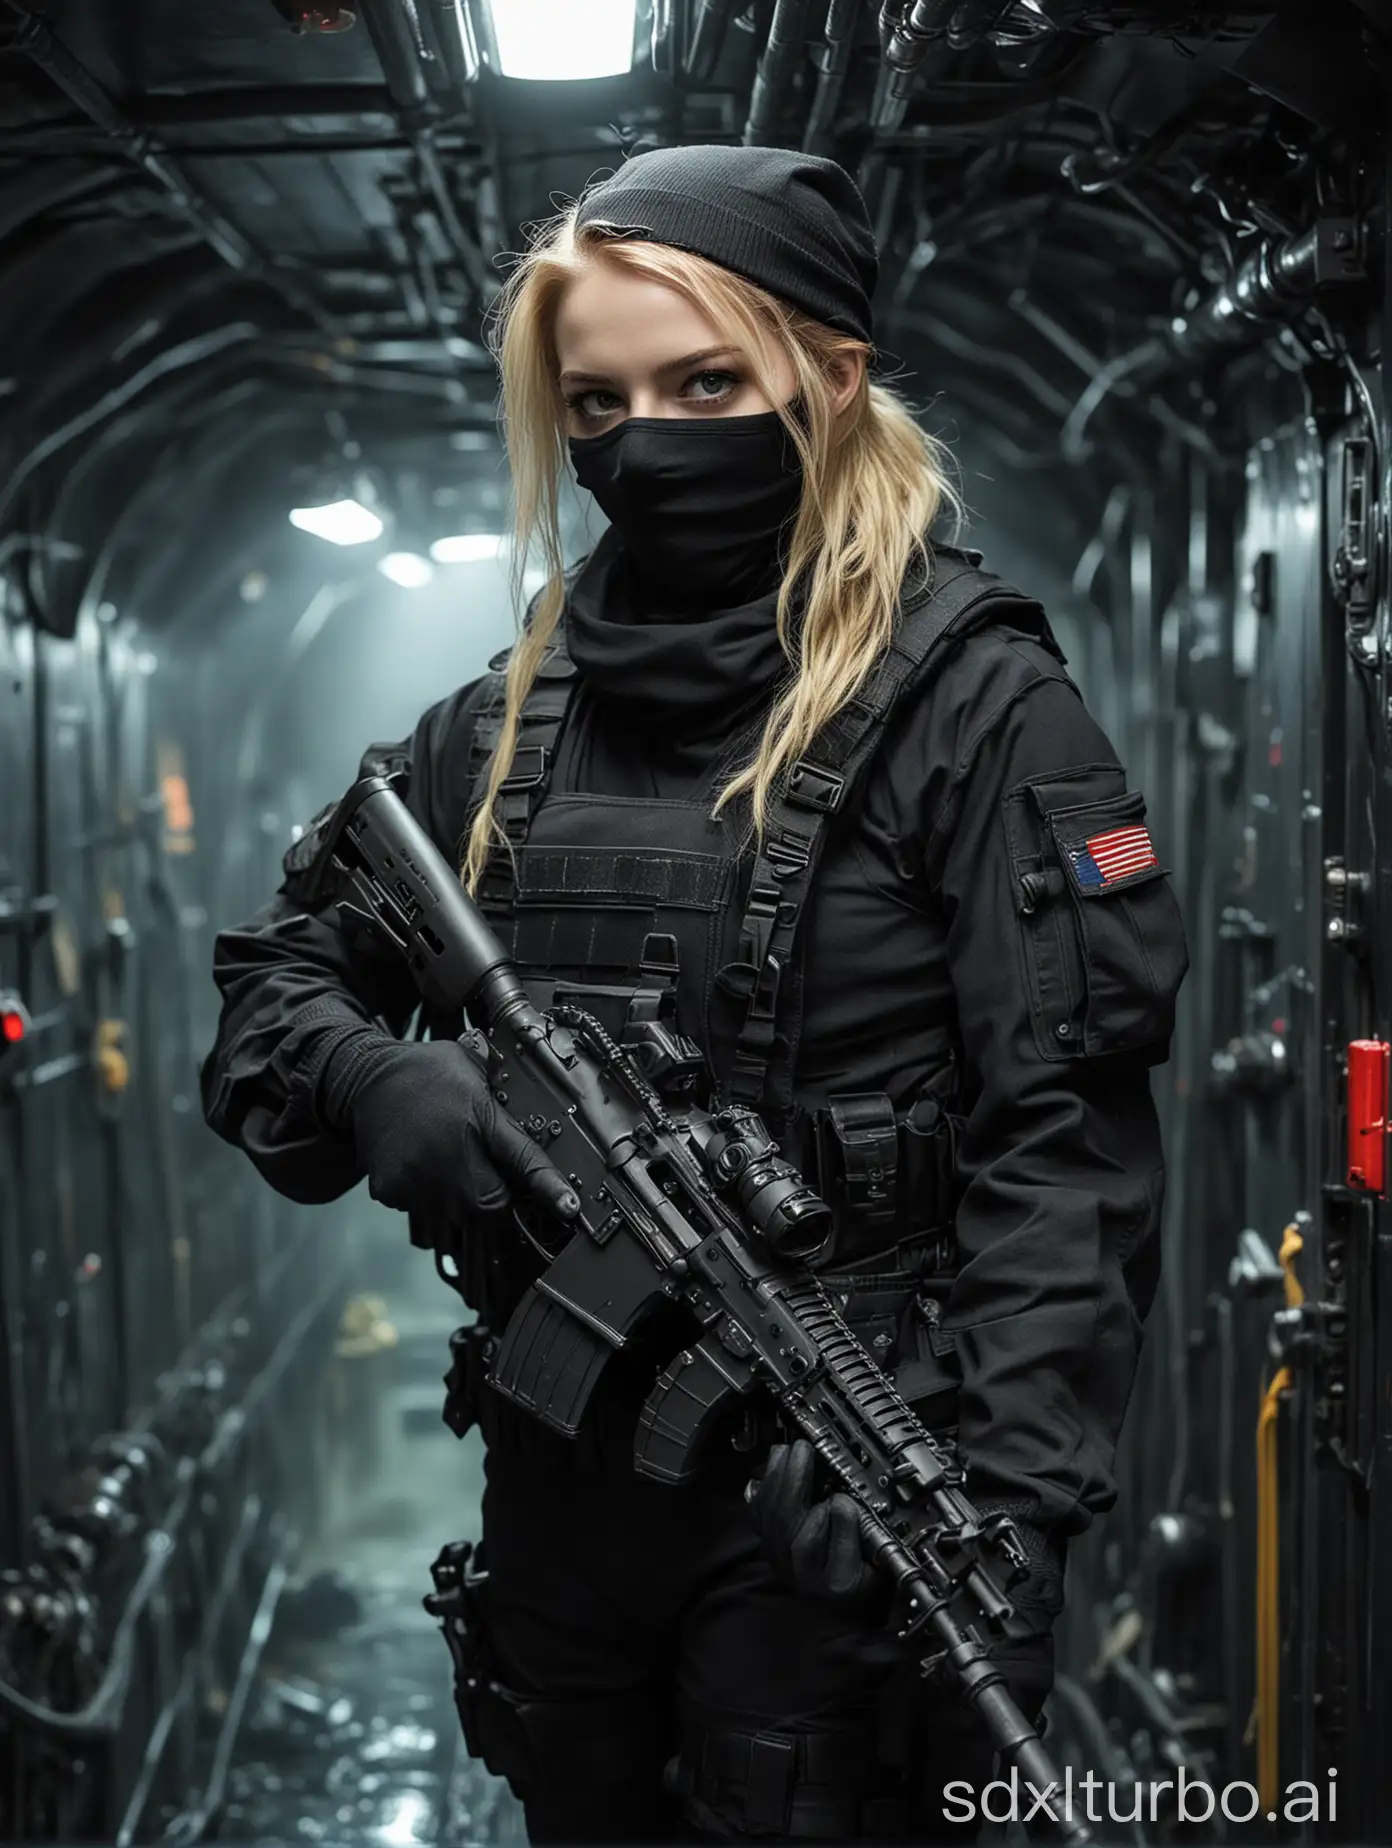 Redheaded-Woman-in-Black-Tactical-Gear-with-Assault-Rifle-in-Submarine